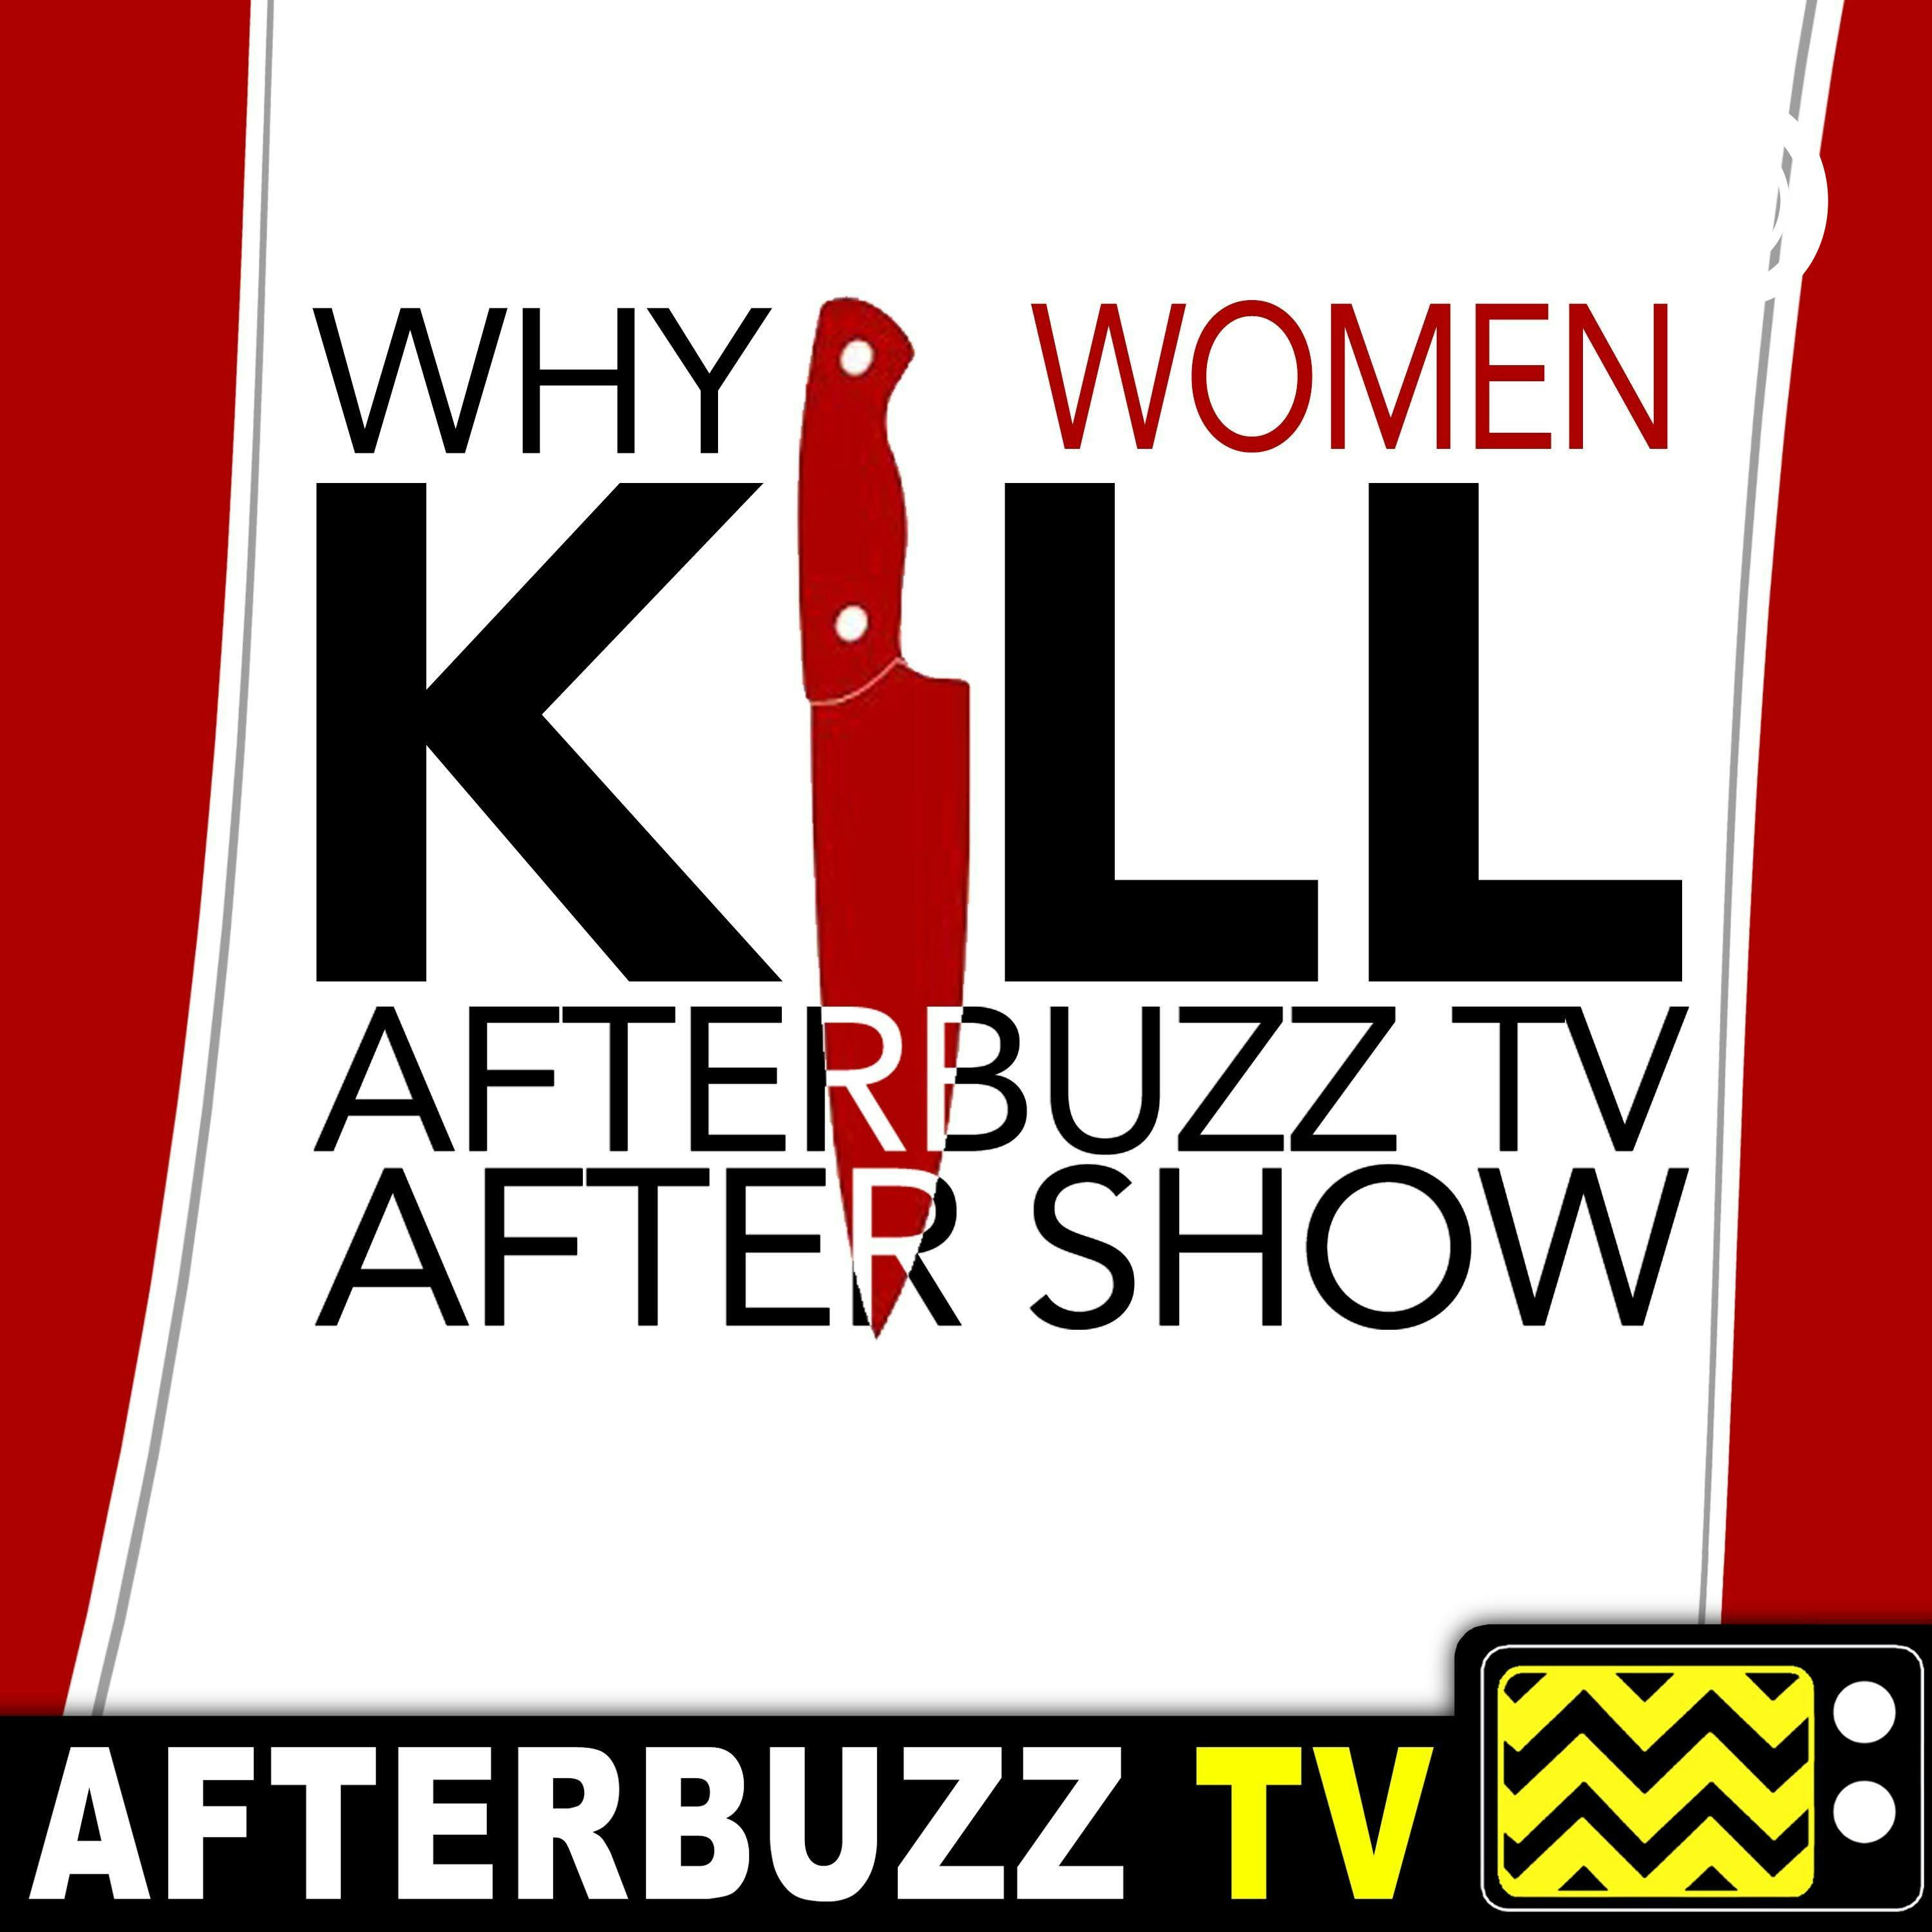 ”Murder Means Never Having to Say You’re Sorry” Season 1 Episode 1 ’Why Women Kill’ Review